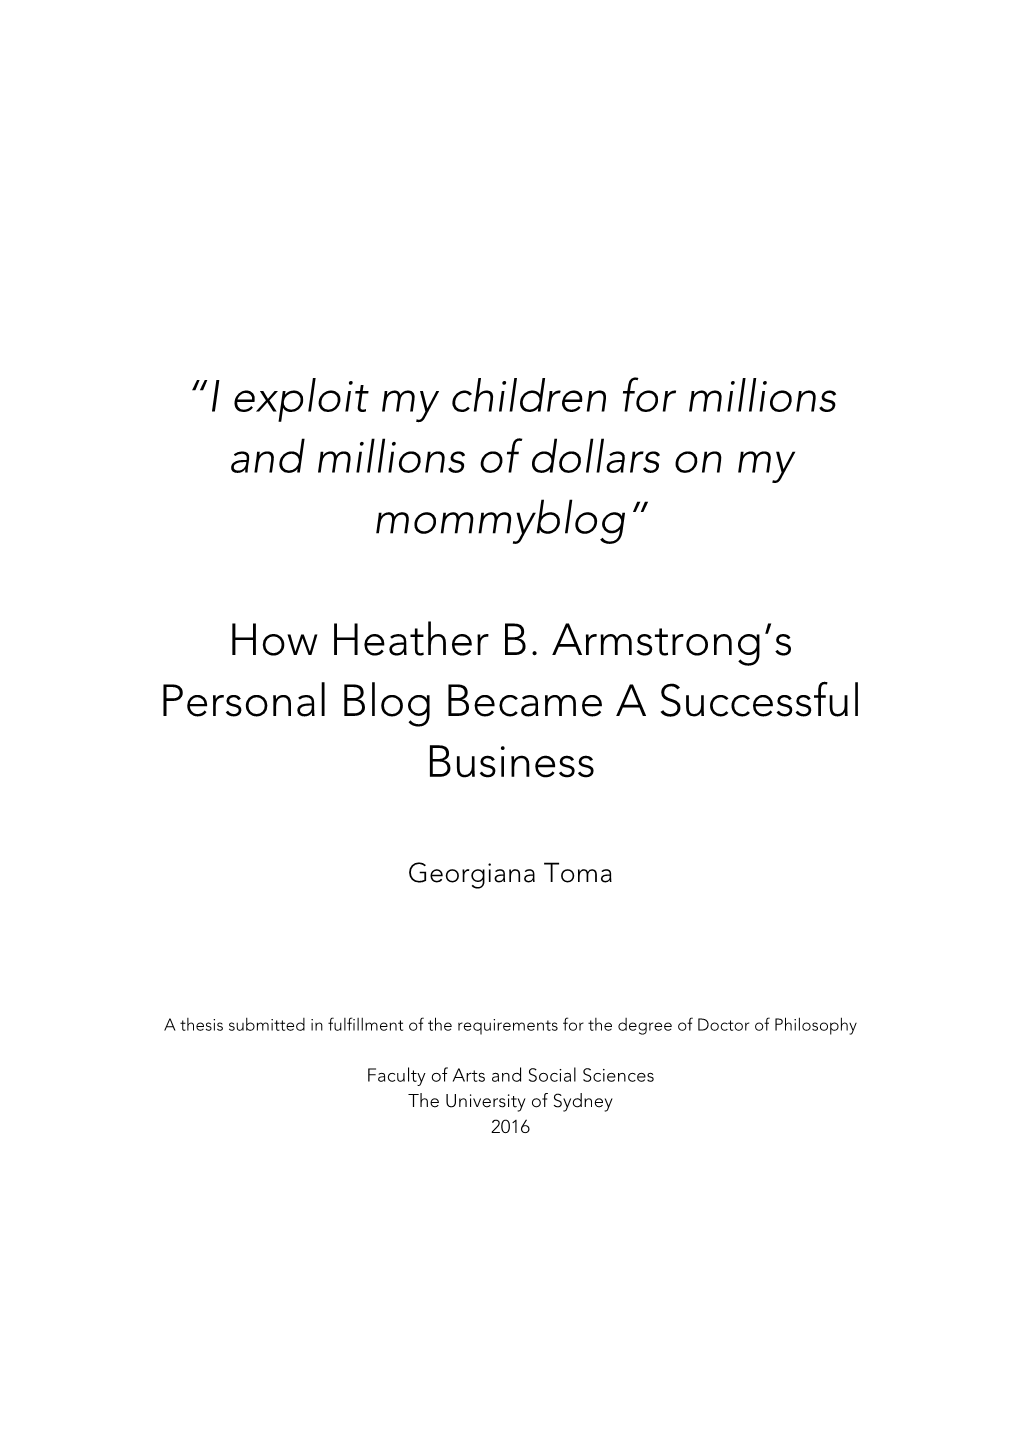 How Heather B. Armstrong's Personal Blog Beca